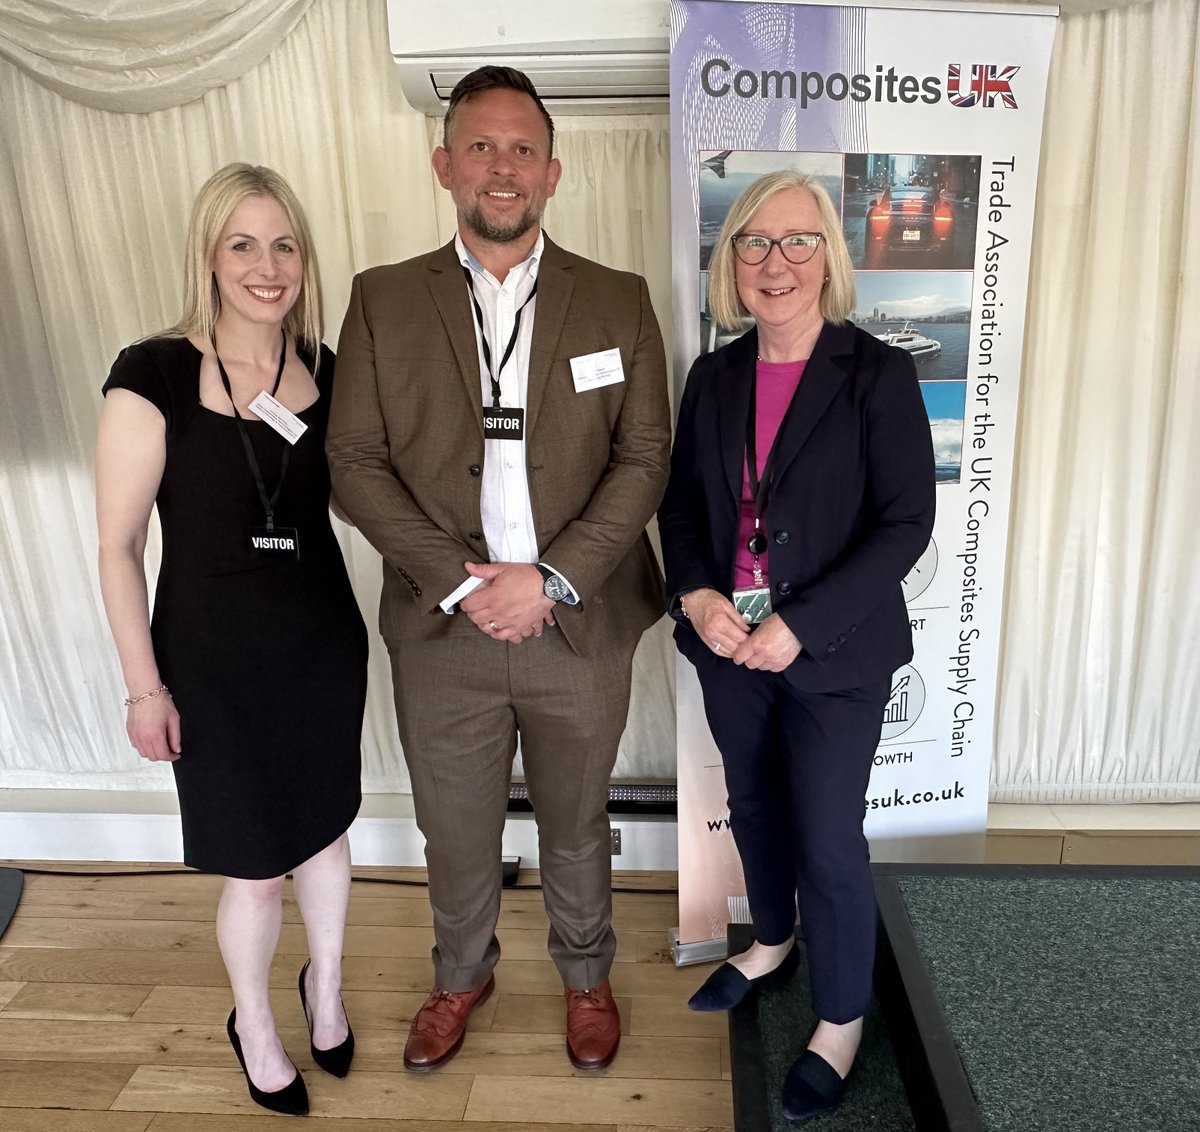 Thanks to #Erewash based Atlas Composite Technologies for meeting me at the @compositesuk event in Parliament The composites sector has a pivotal role to play in the Government’s drive for #NetZero and I’m confident that #Atlas will be at the forefront of this ambition